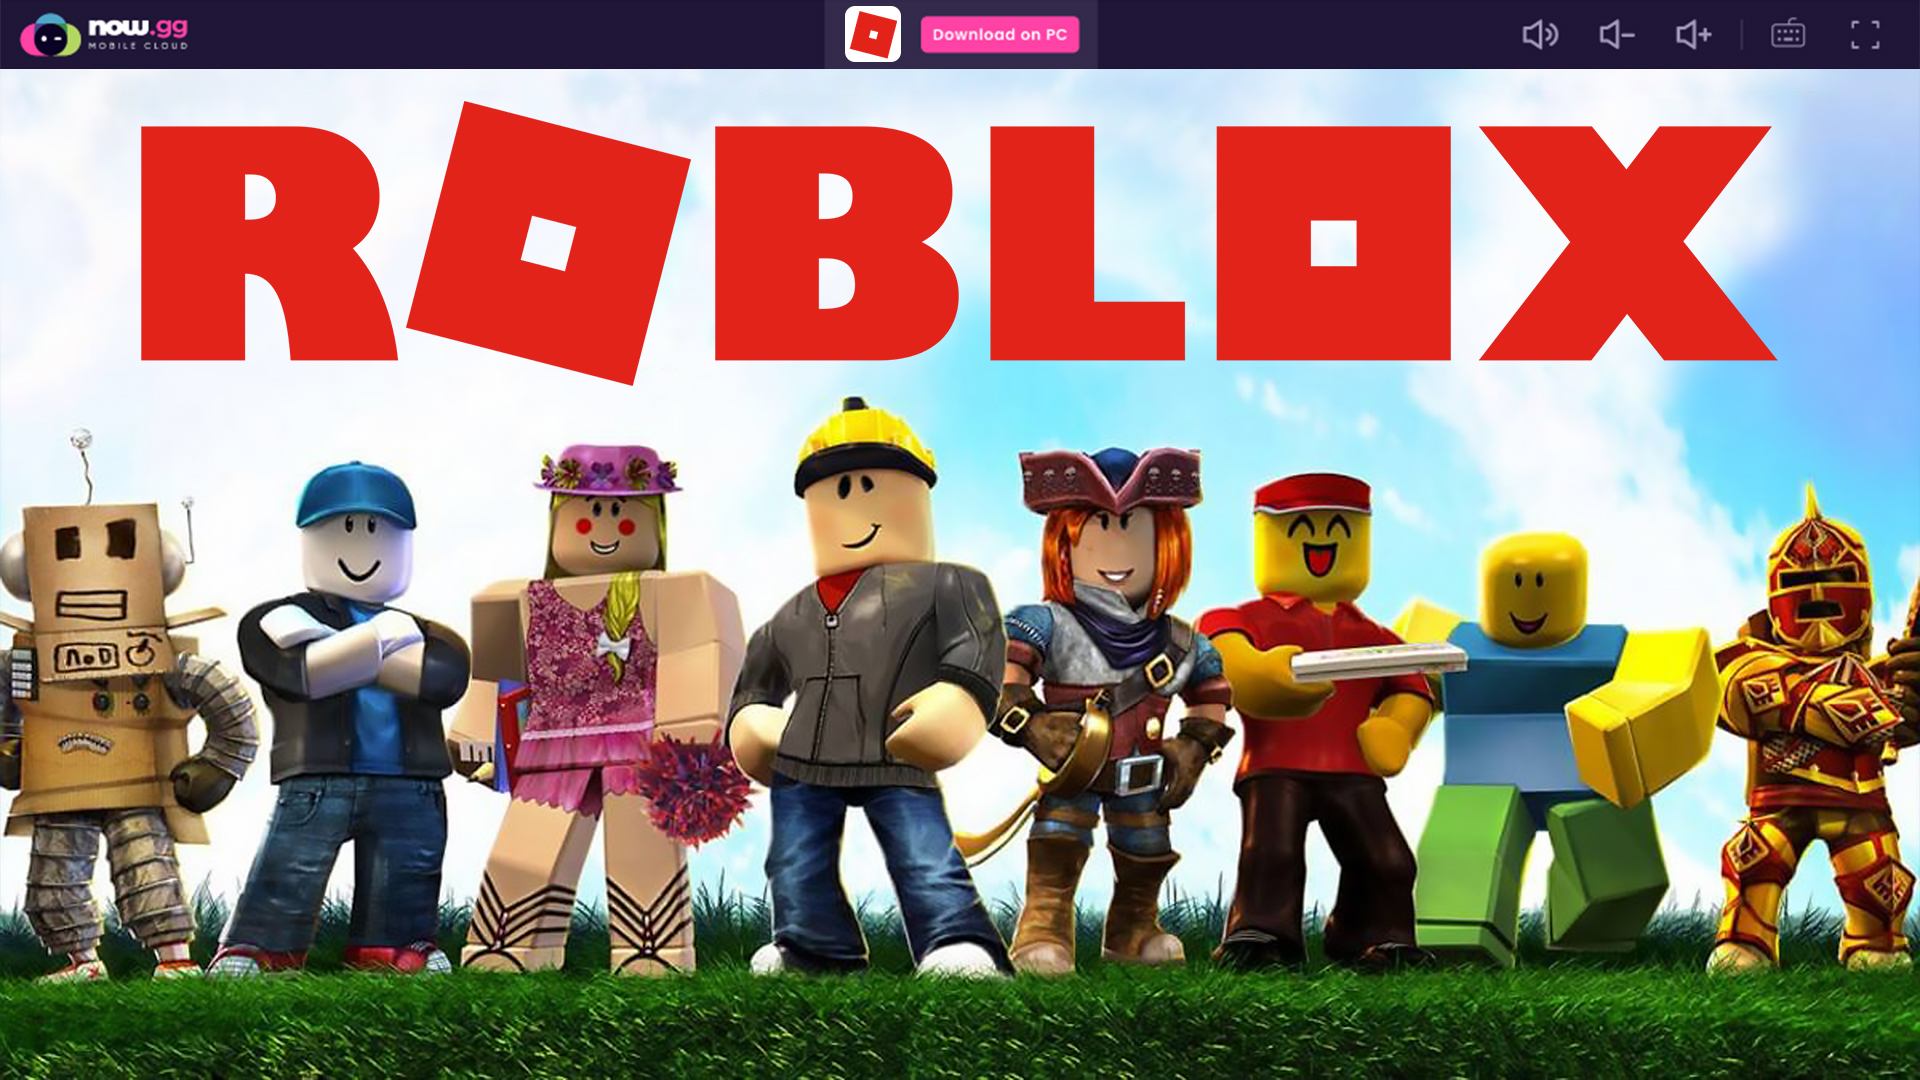 Roblox on now.gg – Enhance Your Gaming Experience by Playing Roblox Online on the Cloud